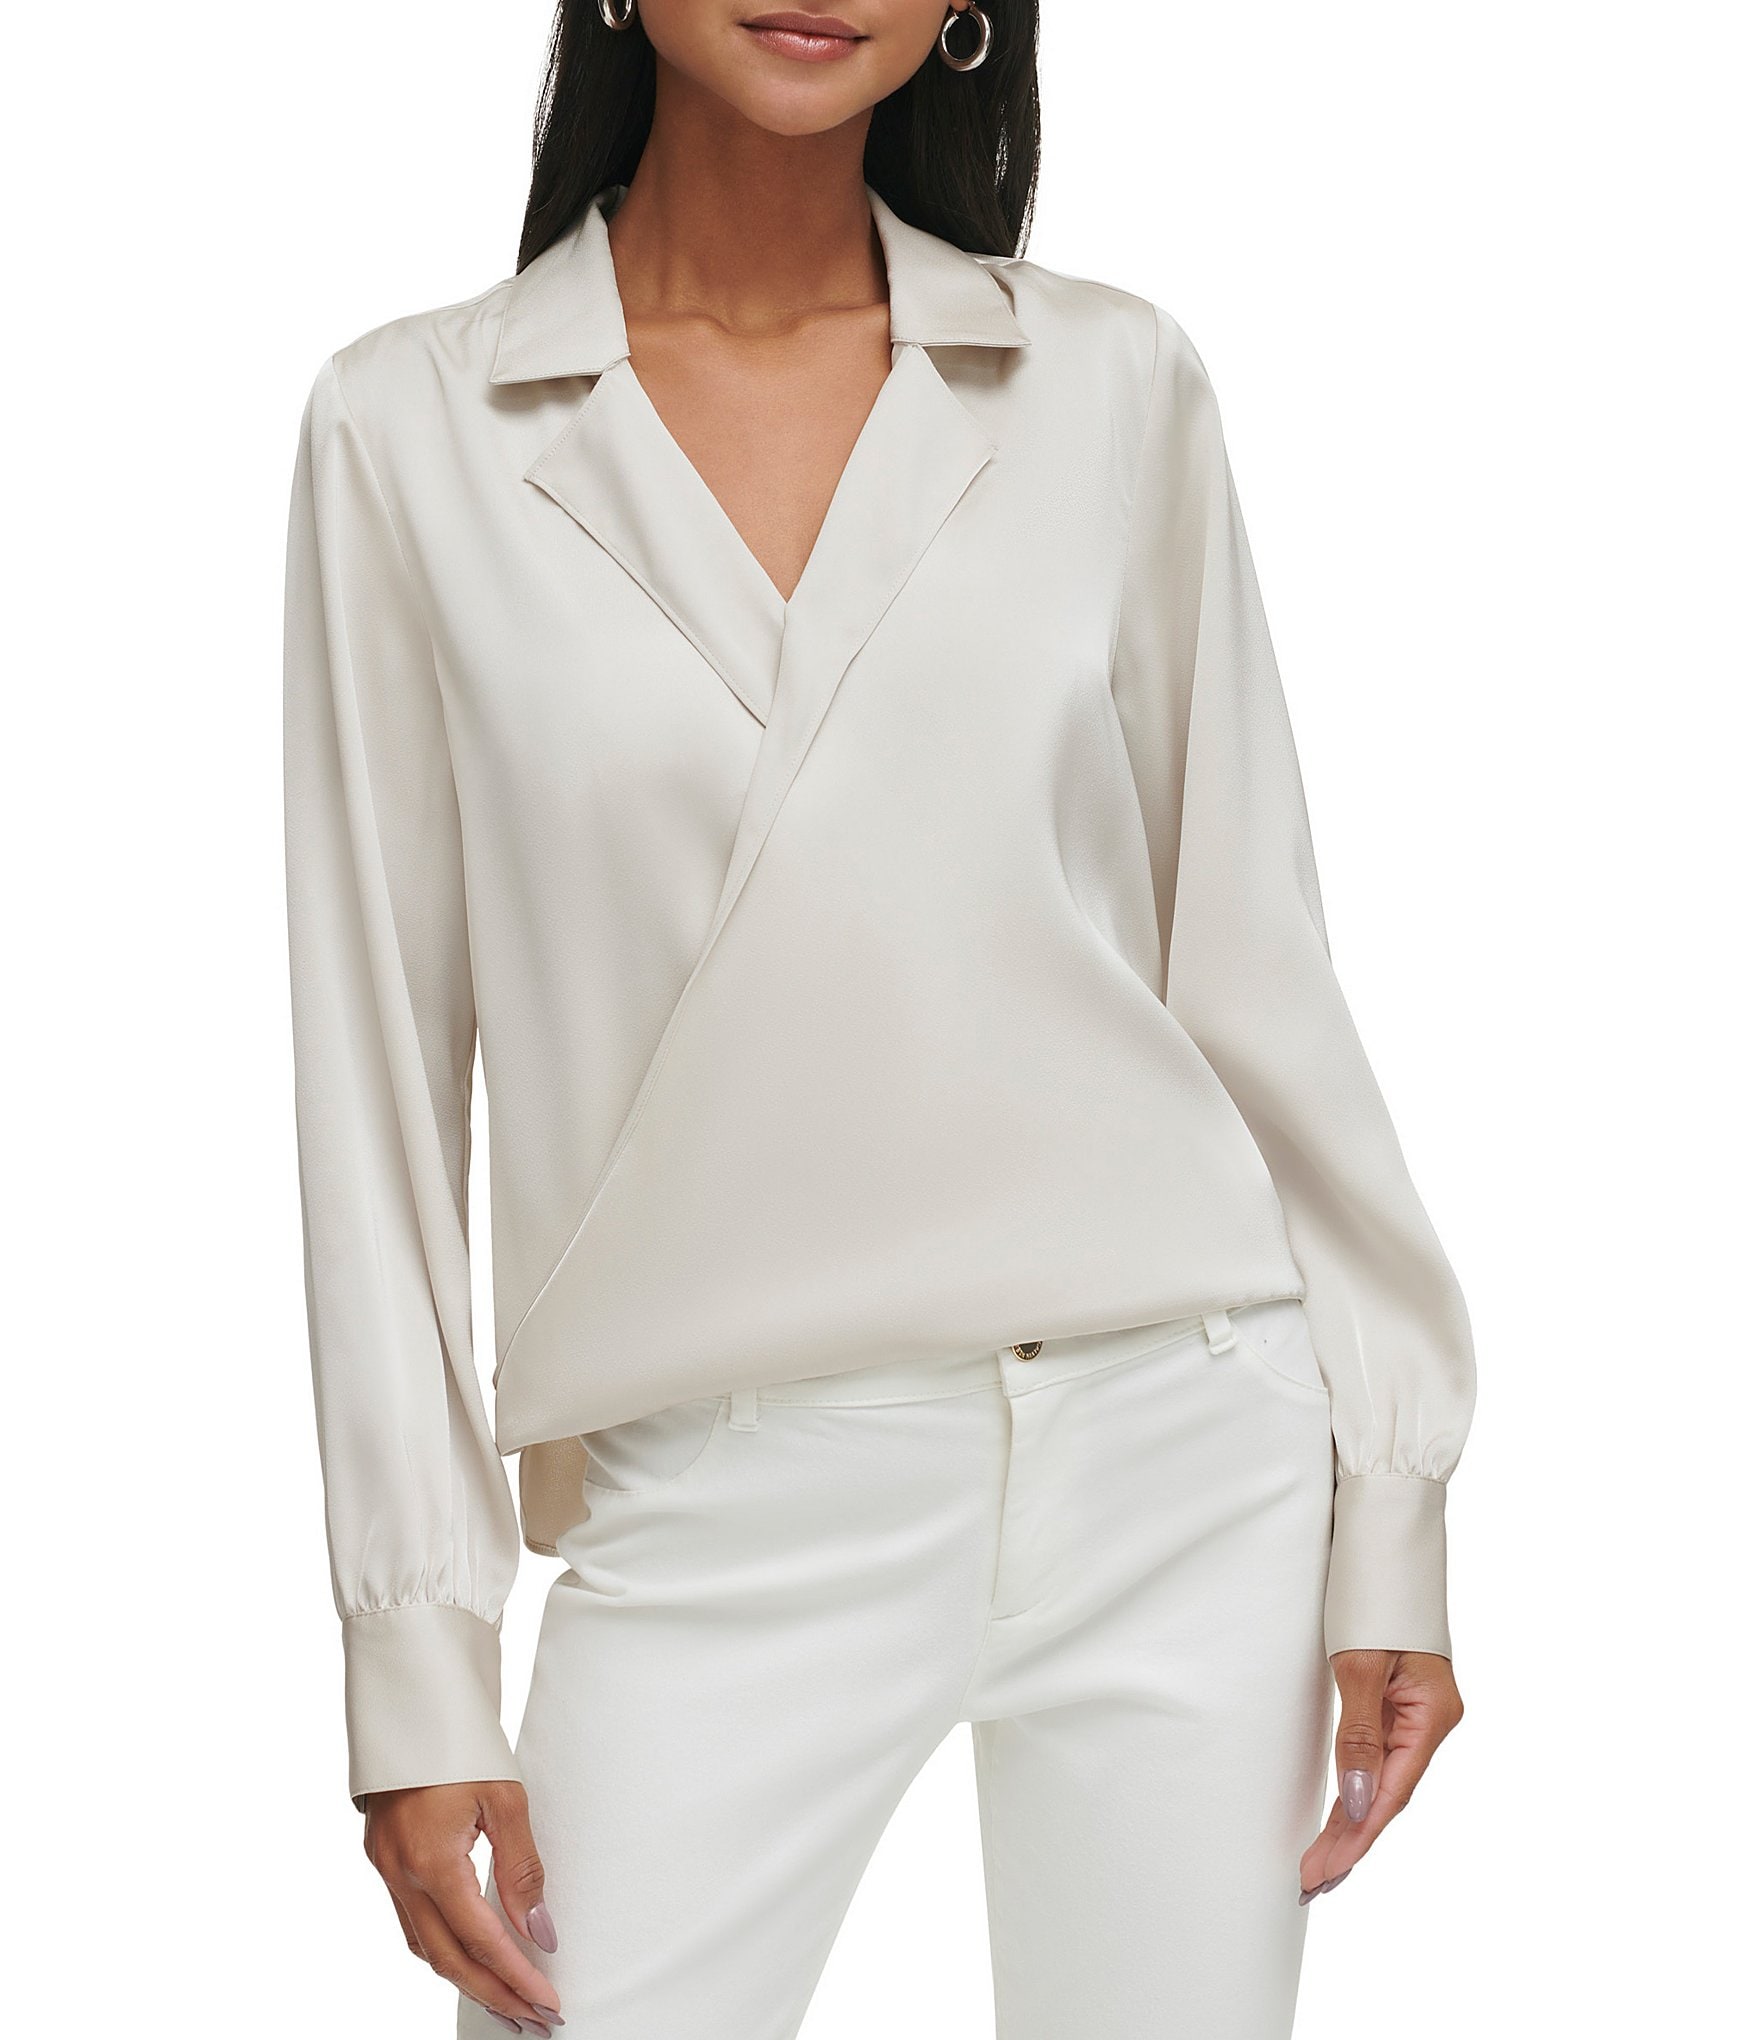 https://dimg.dillards.com/is/image/DillardsZoom/zoom/calvin-klein-collared-v-neck-wrap-front-blouse/00000000_zi_a49aee72-ccaf-4e0b-a524-42b628a90faf.jpg